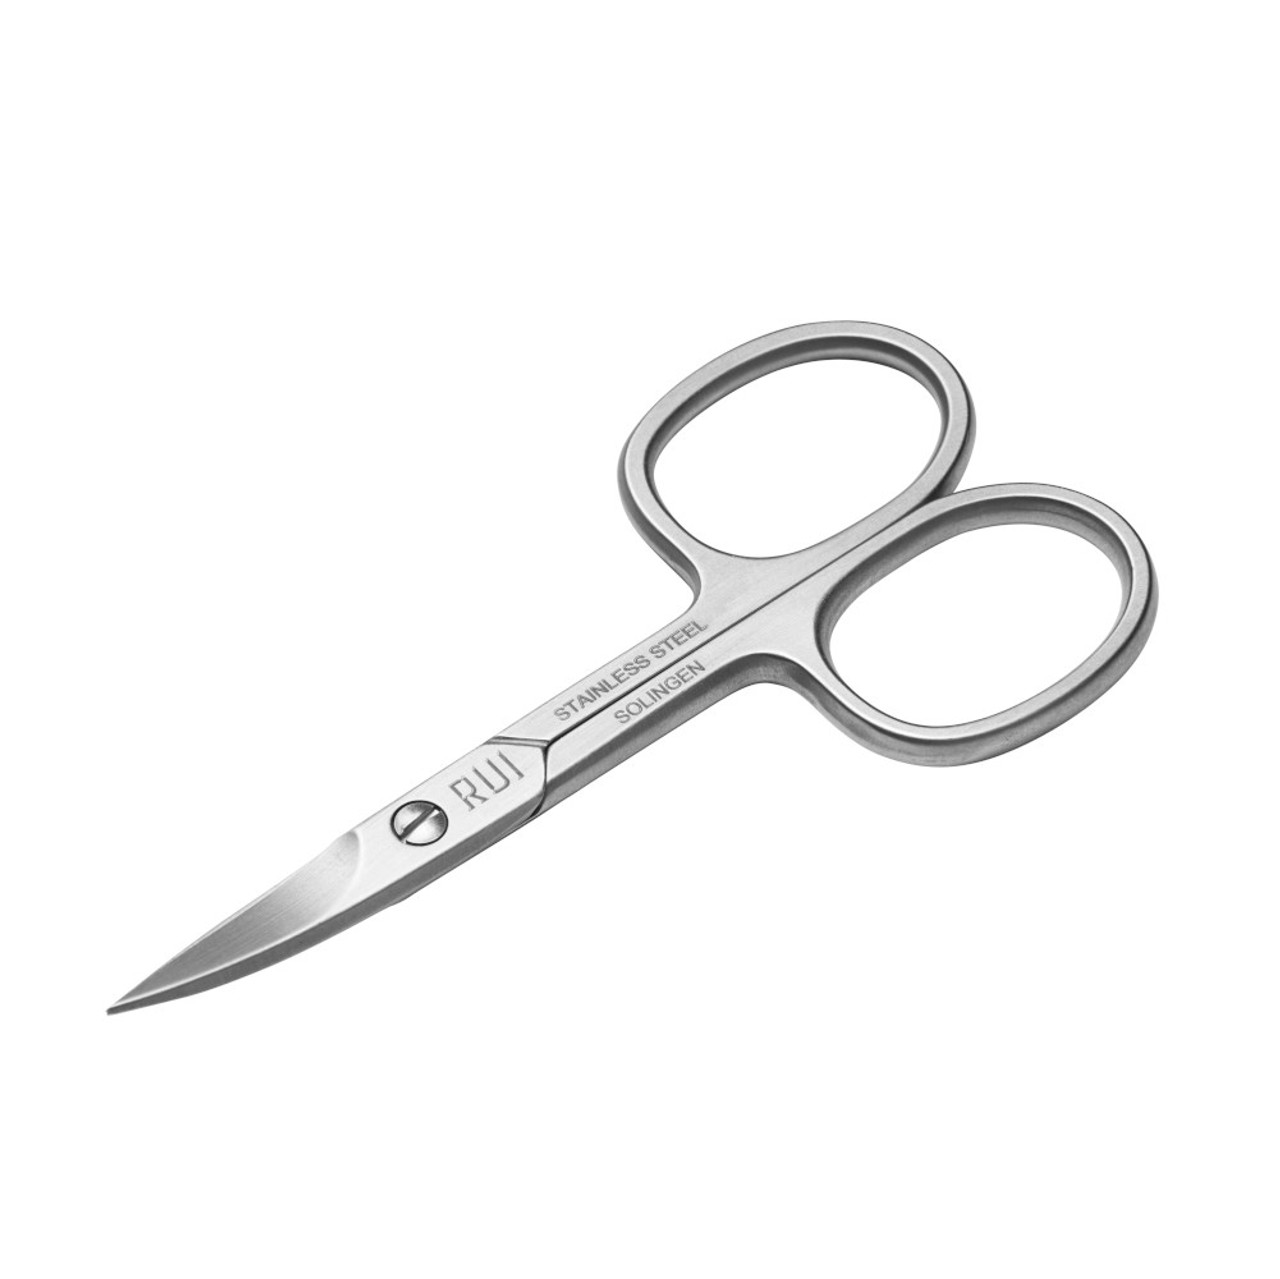 Rui Smiths Pro Precision Nail Scissors | Stainless Steel Manicure Pedicure Trimmer Cutter with Micro-Serrated, Anti-Skid, Curved Cutting Edges | Made